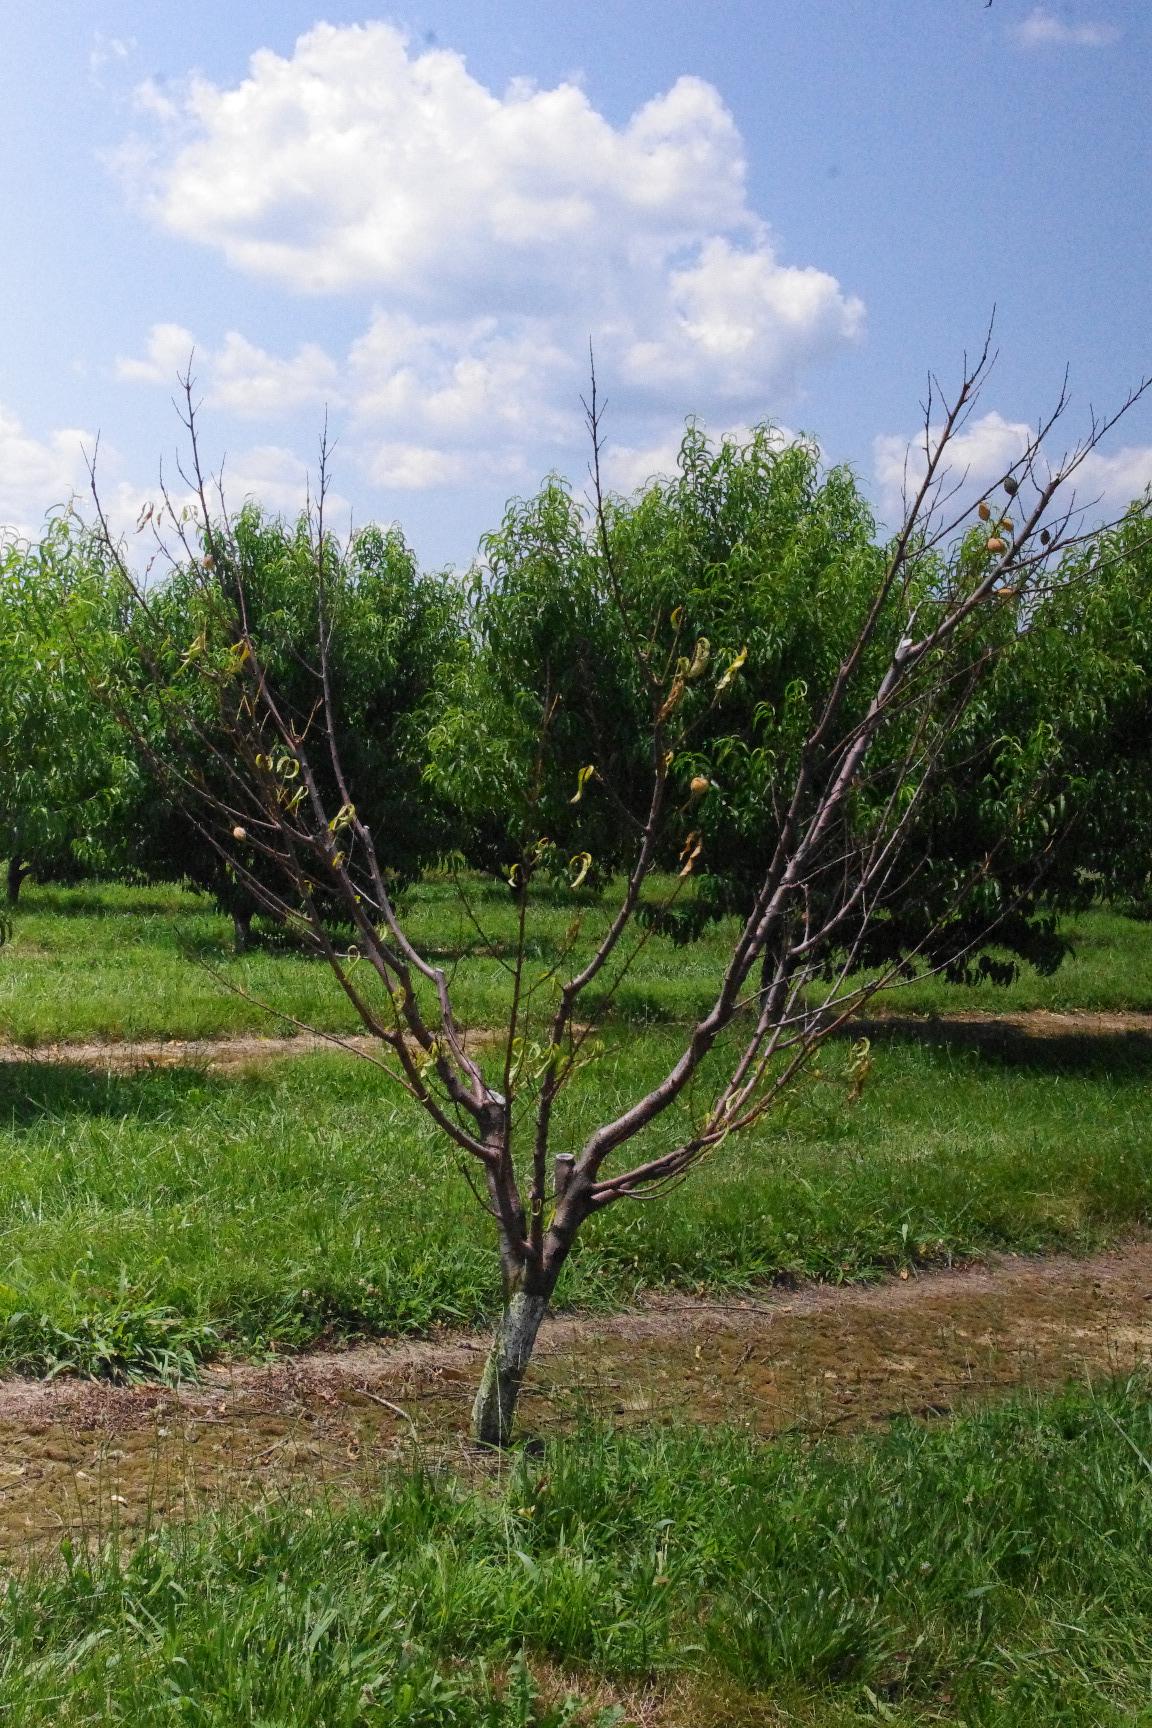 Phytophthora root rot and crown rot